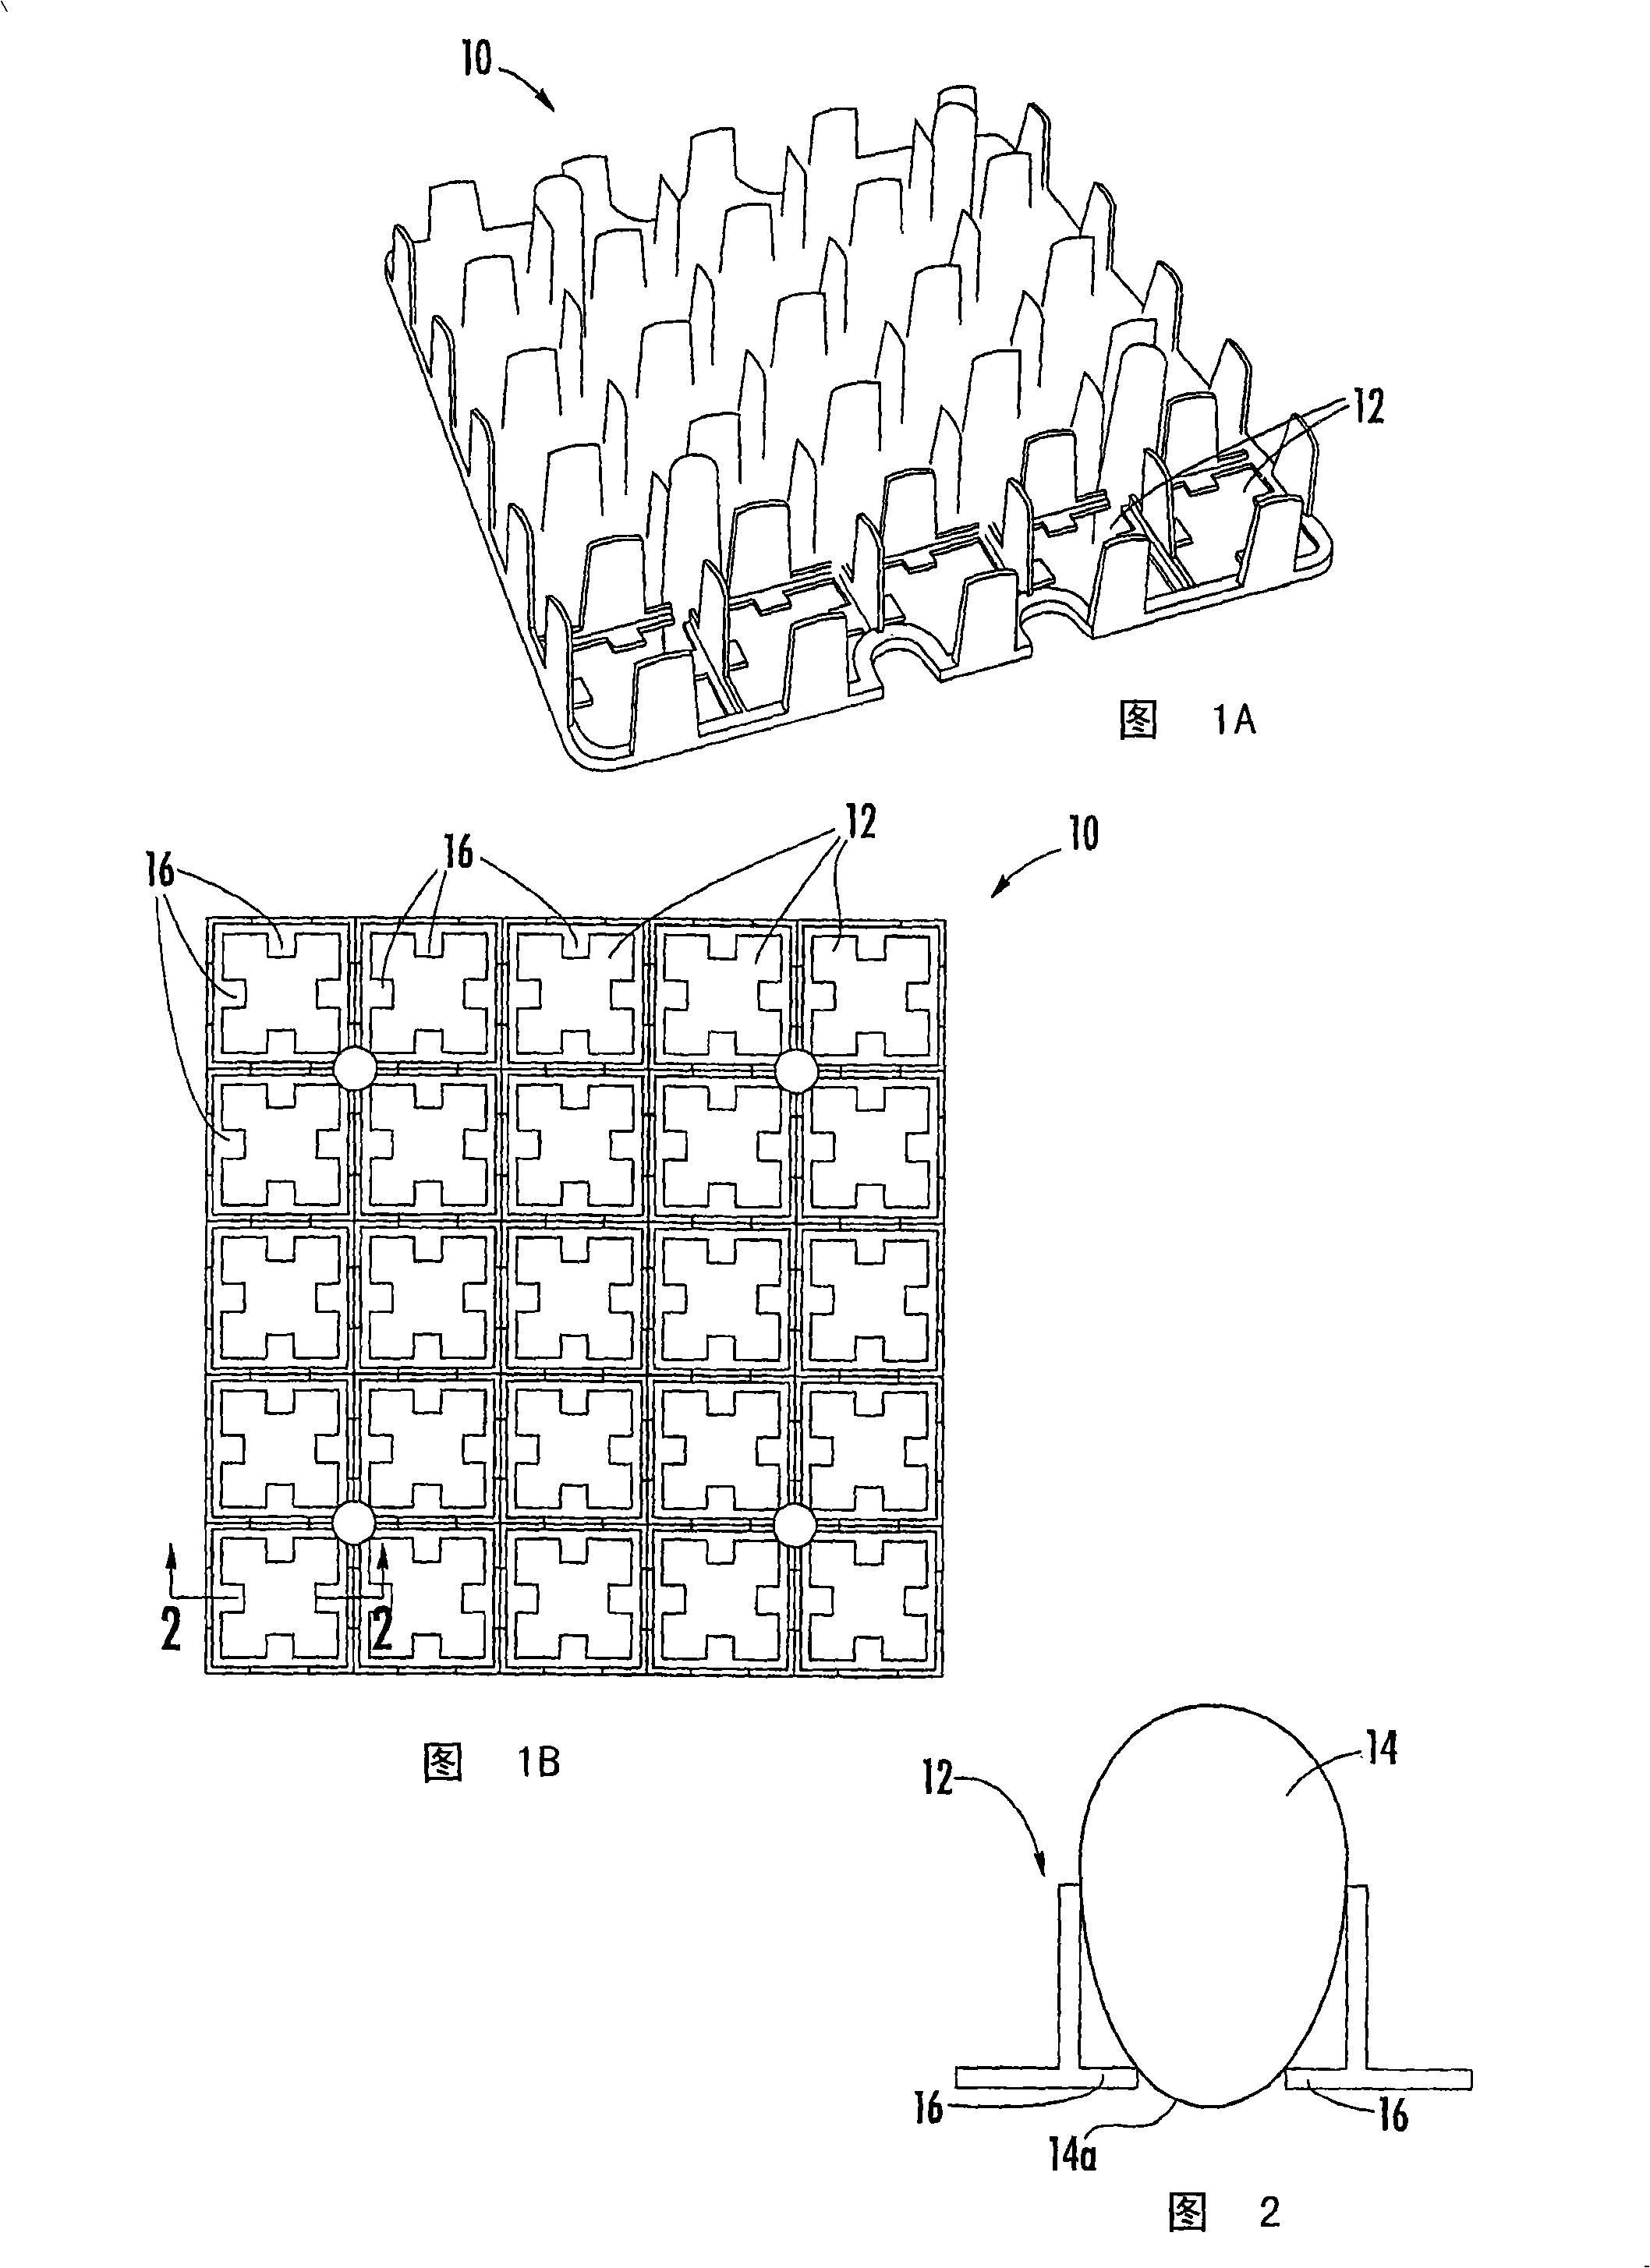 Methods and apparatus for detecting the presence of eggs in an egg flat